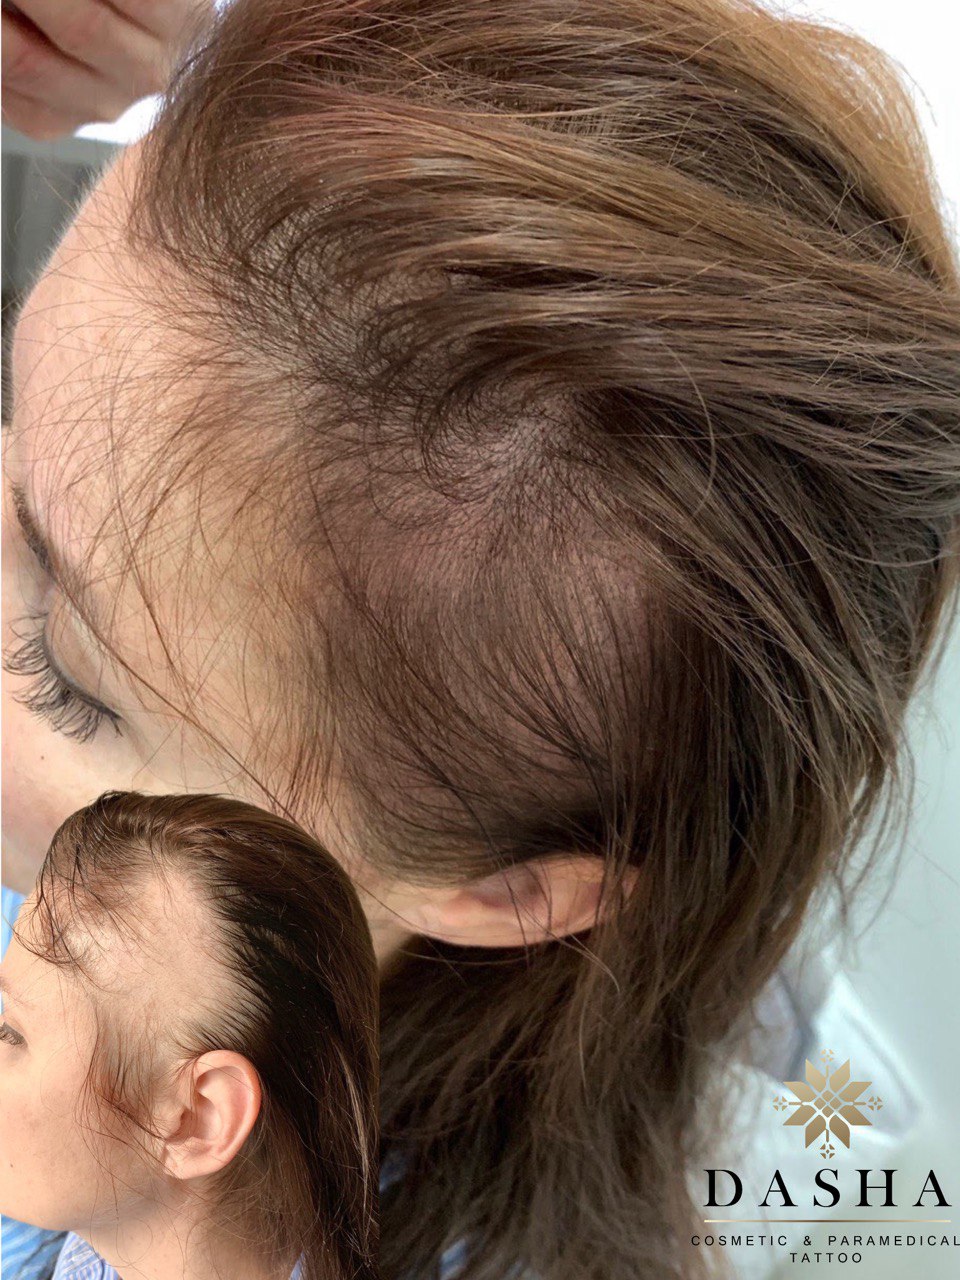 Alopecia Areata SMP. Cosmetic and Mediical Tattoo by Dasha. Permanent makeup and reconstructive tattoo, scalp micro-pigmentation in Christchurch, New Zealand